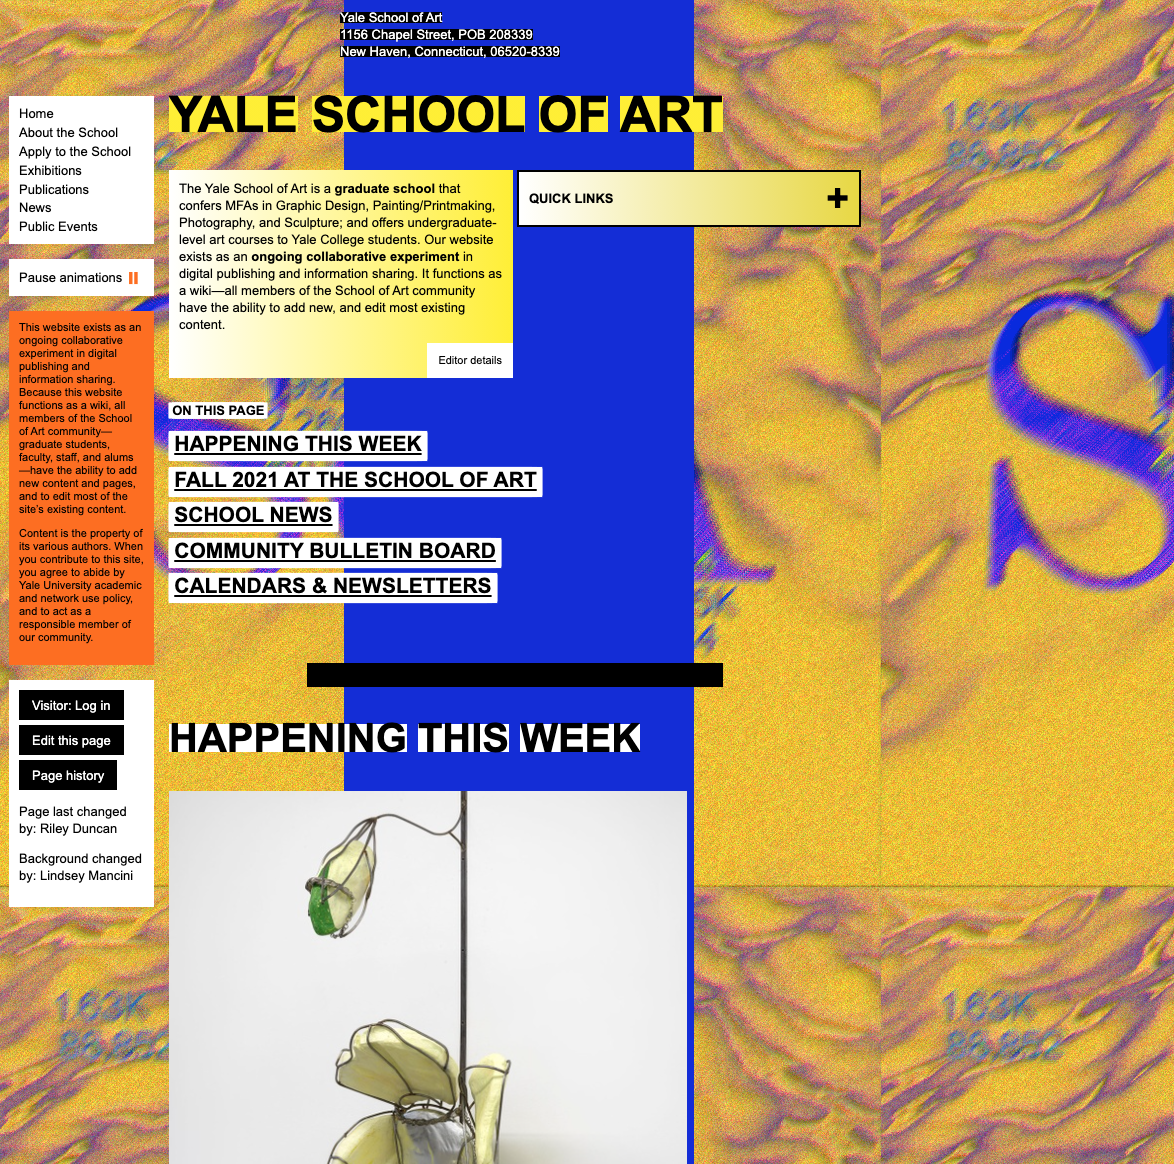 The Yale School of Art home page. The background is a cut off yellow image. There is a bold blue streak in the middle of the screen. Content is placed in yellow boxes with black text.